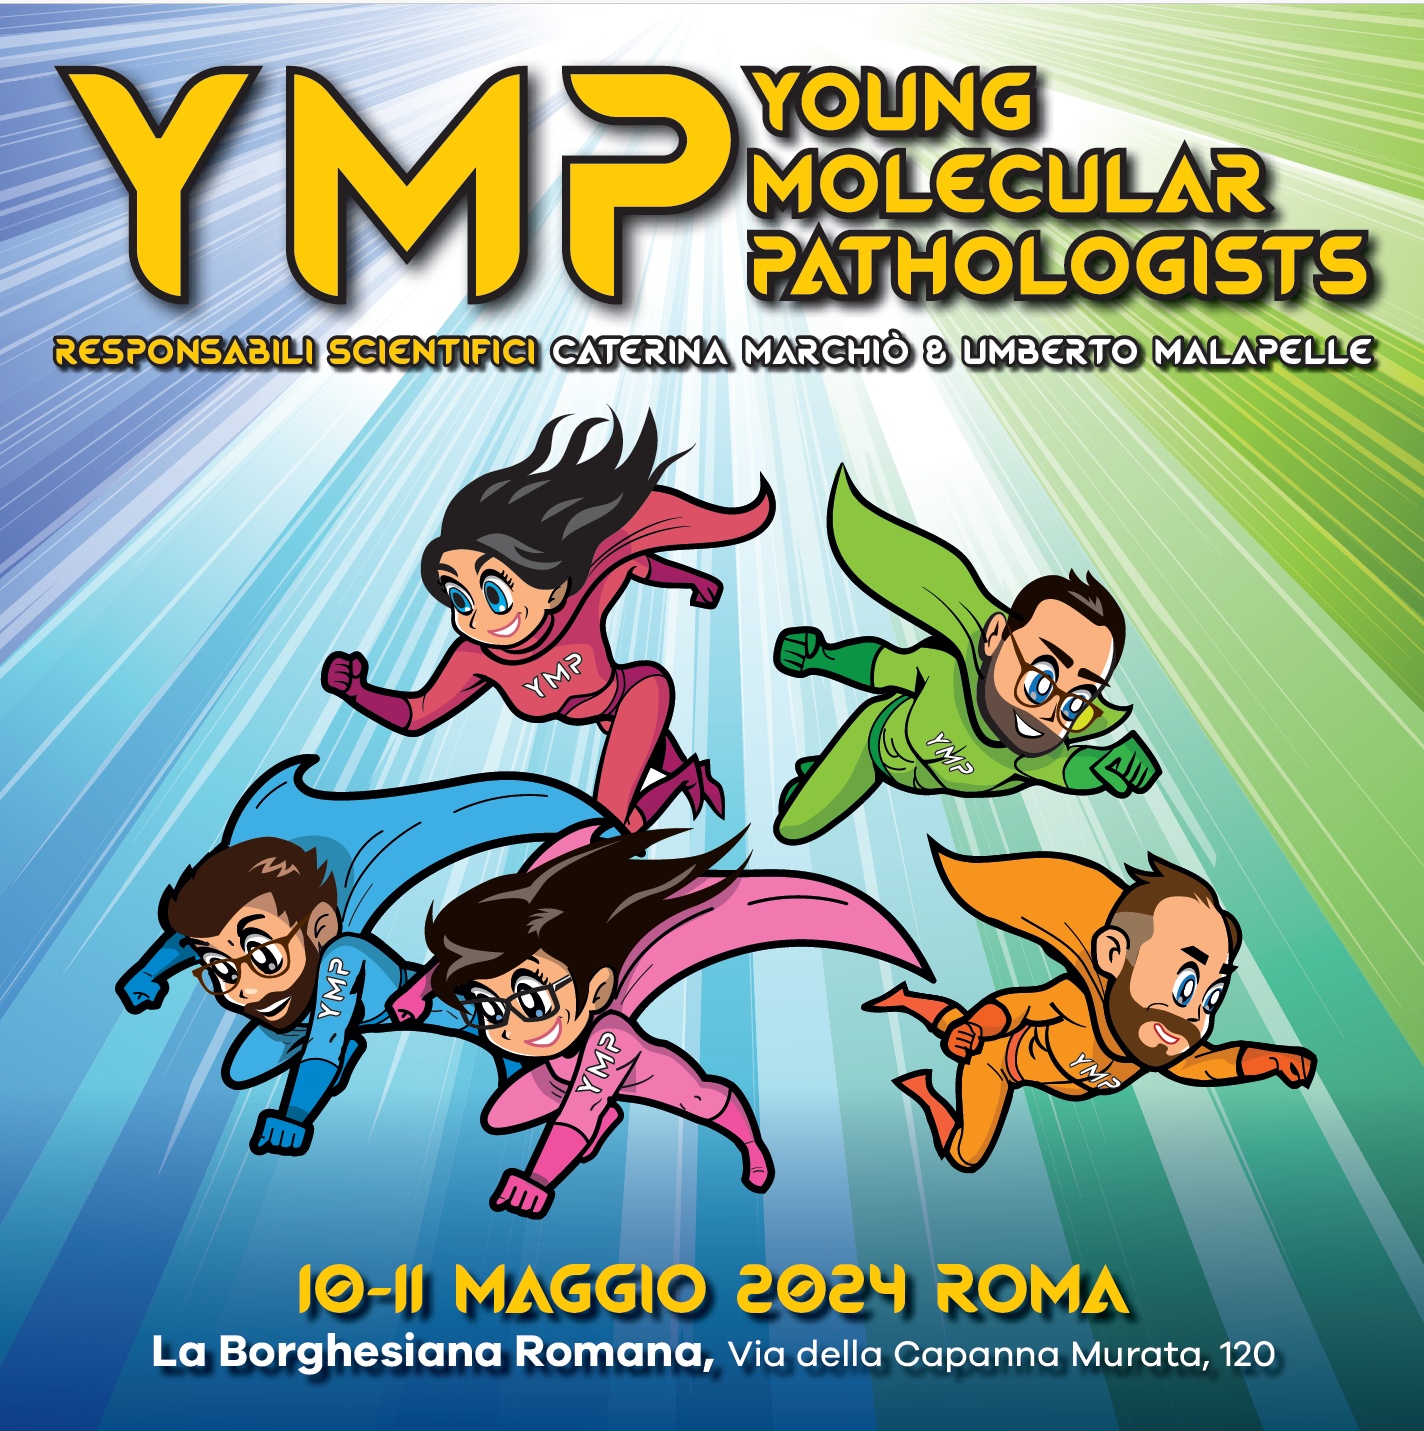 YMP. YOUNG MOLECULAR PATHOLOGISTS